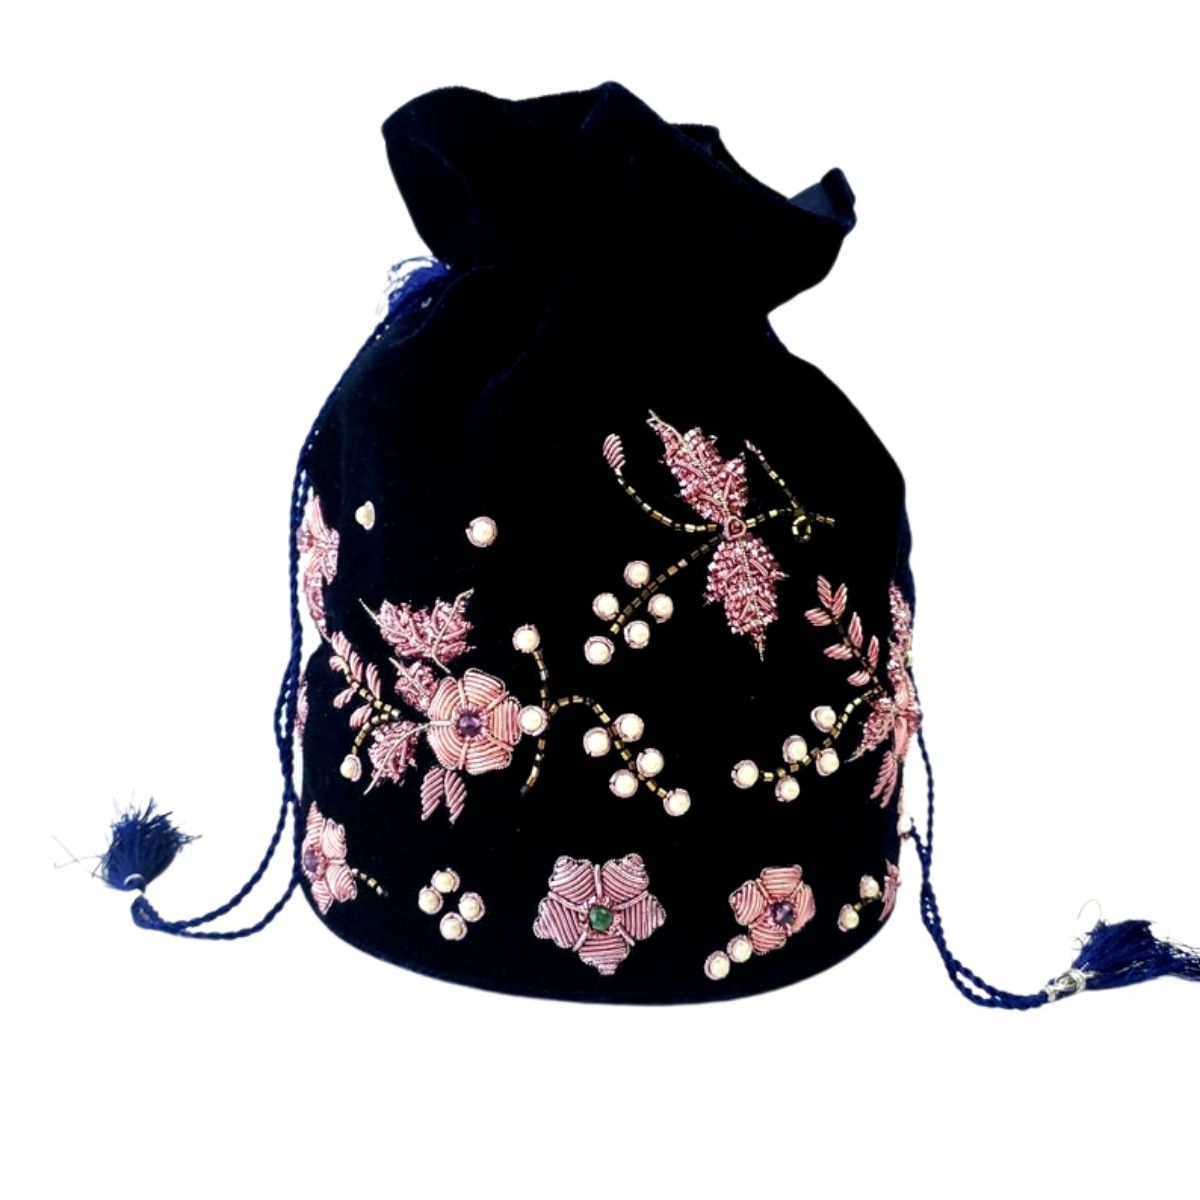 Navy blue velvet potli bag bucket bag embroidered with pink metallic flowers and inlaid with semi precious stones, Indian potli bag.